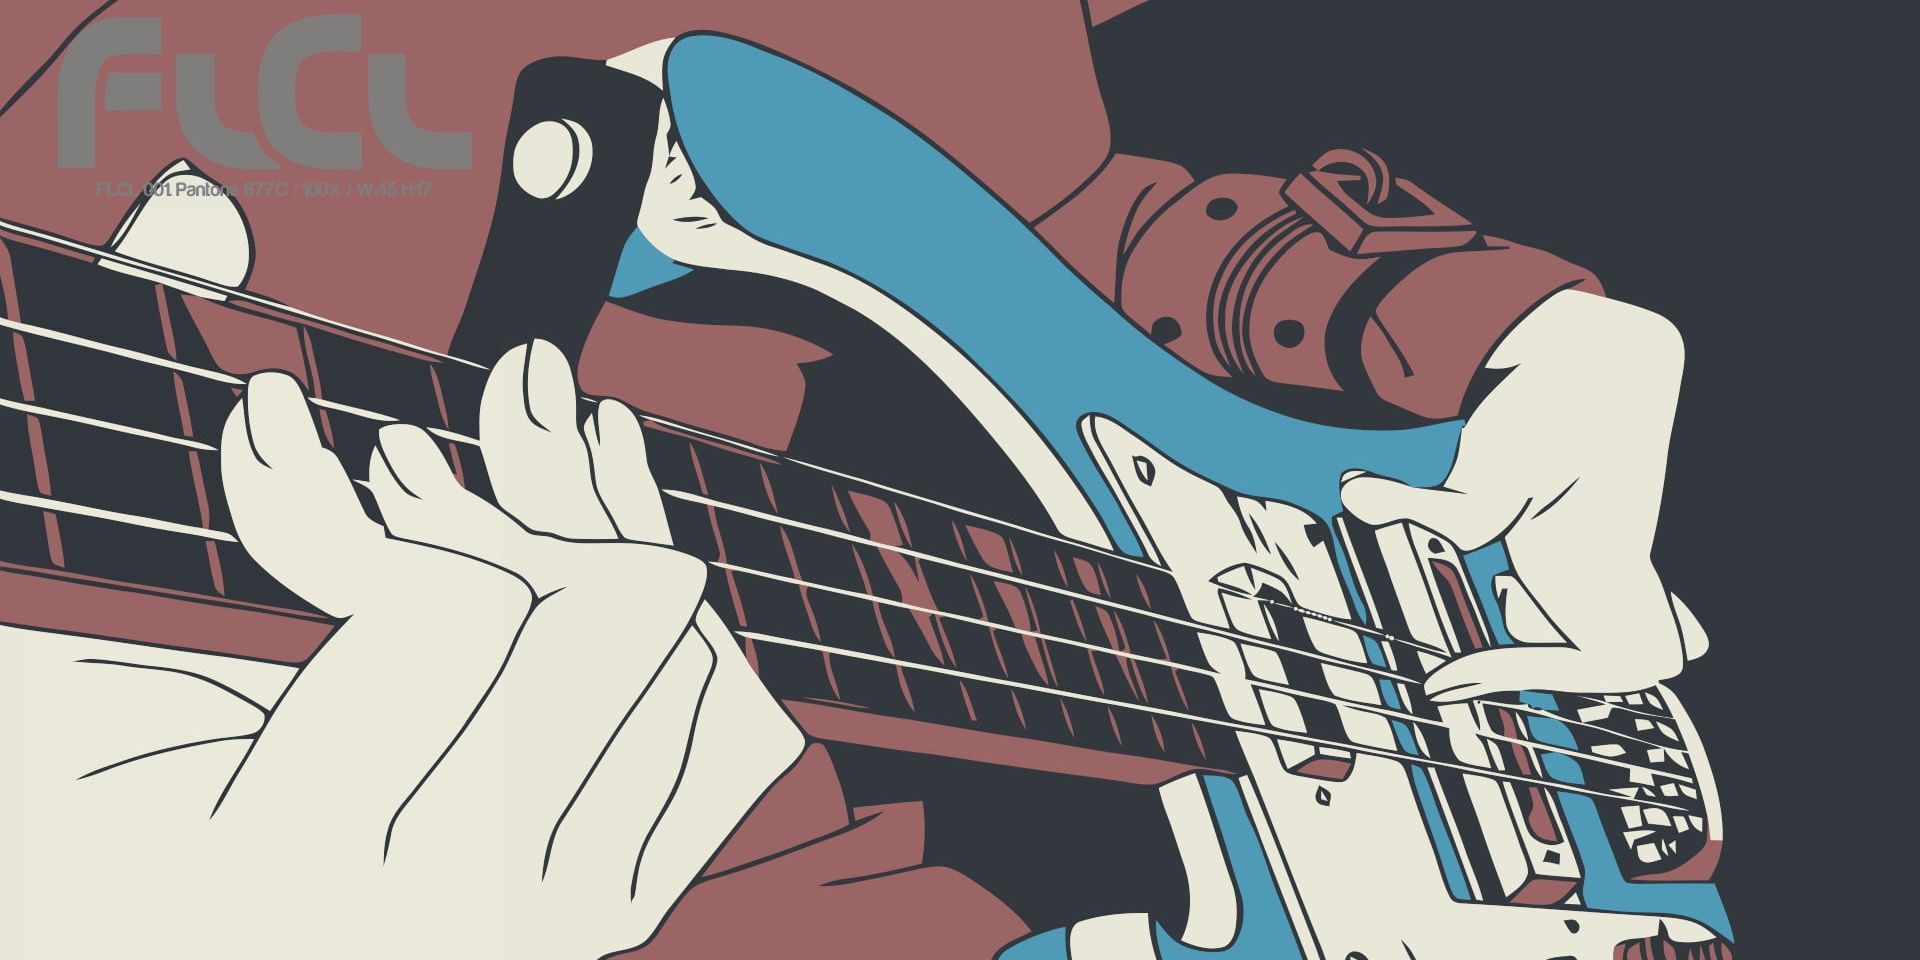 haruko haruhara from flcl playing her left-handed rickenbaker bass guitar